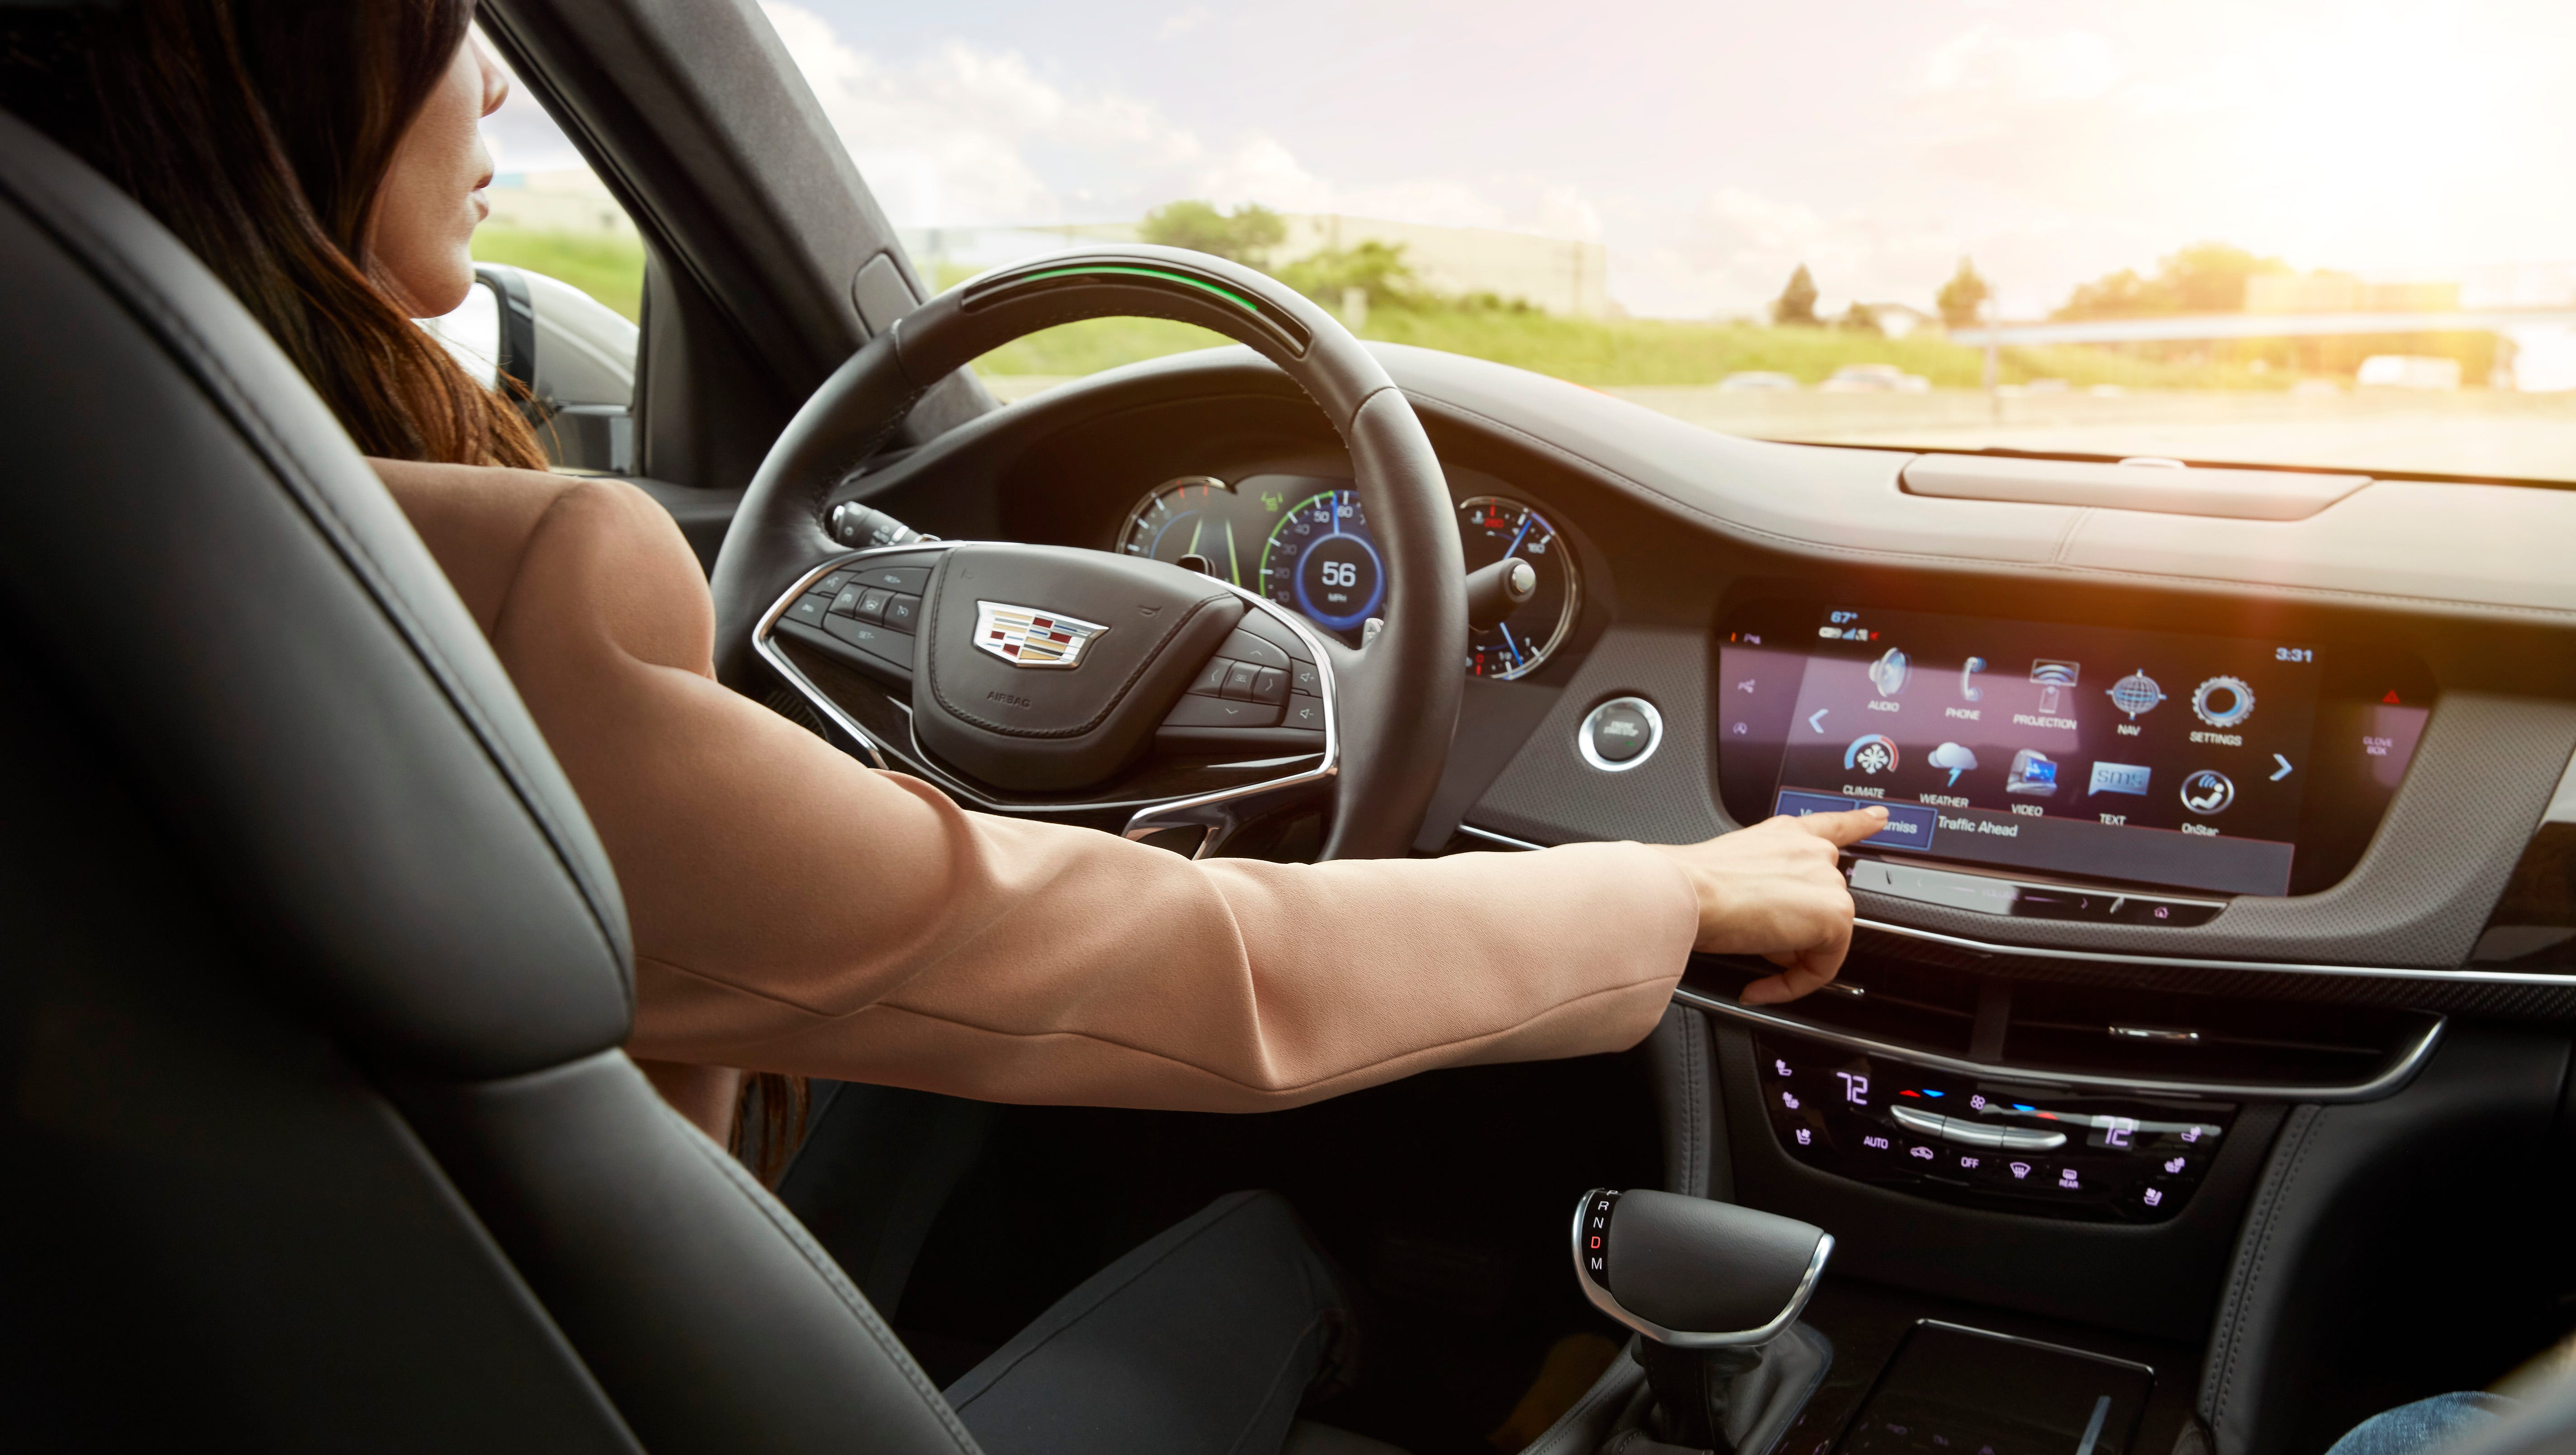 Cadillac is expanding its Super Cruise hands-free driver assistance feature across its entire lineup of vehicles, the company announced Wednesday.